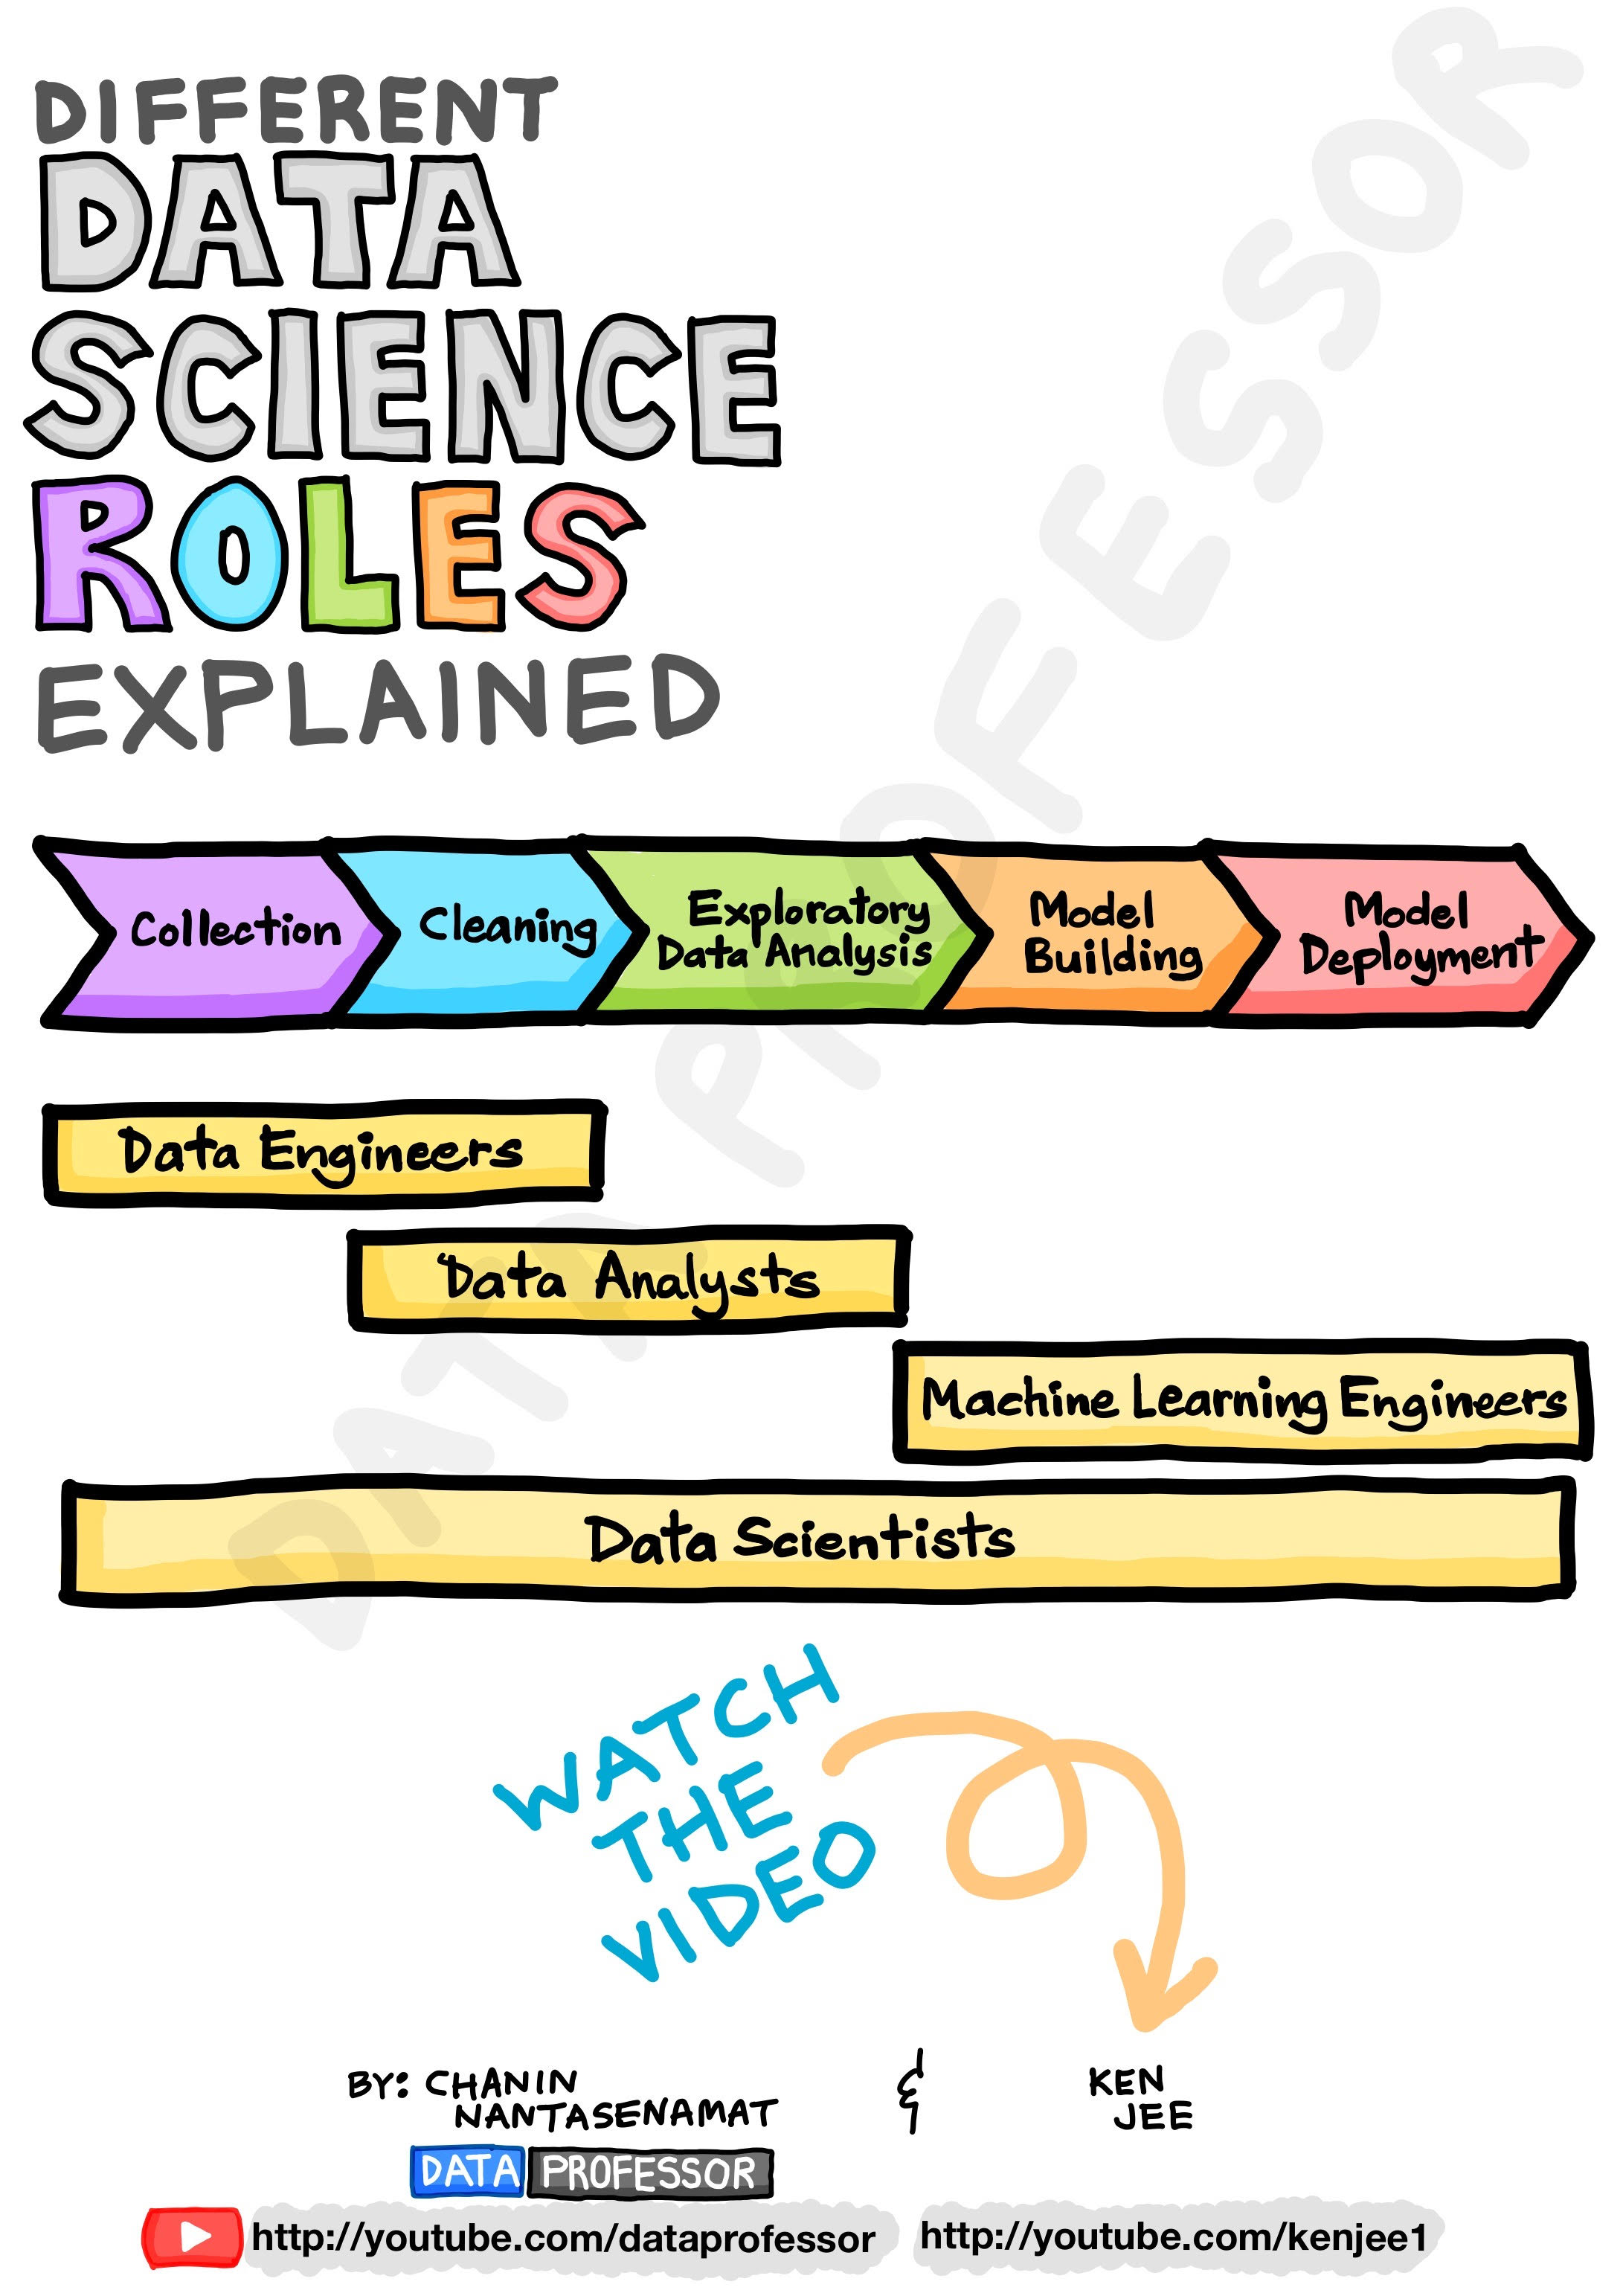 Different Data Science Roles Explained